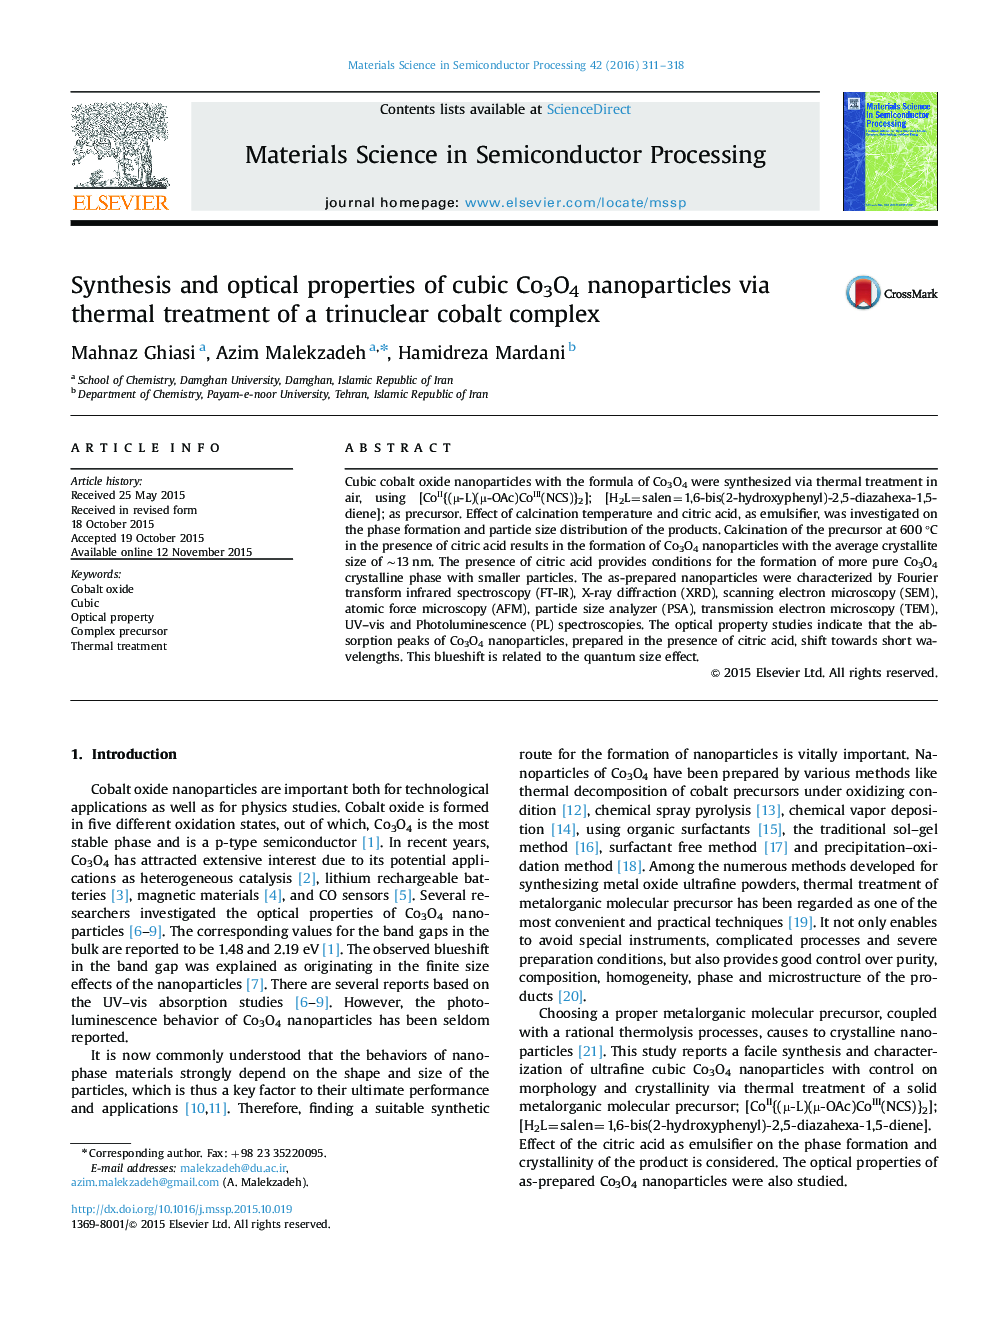 Synthesis and optical properties of cubic Co3O4 nanoparticles via thermal treatment of a trinuclear cobalt complex